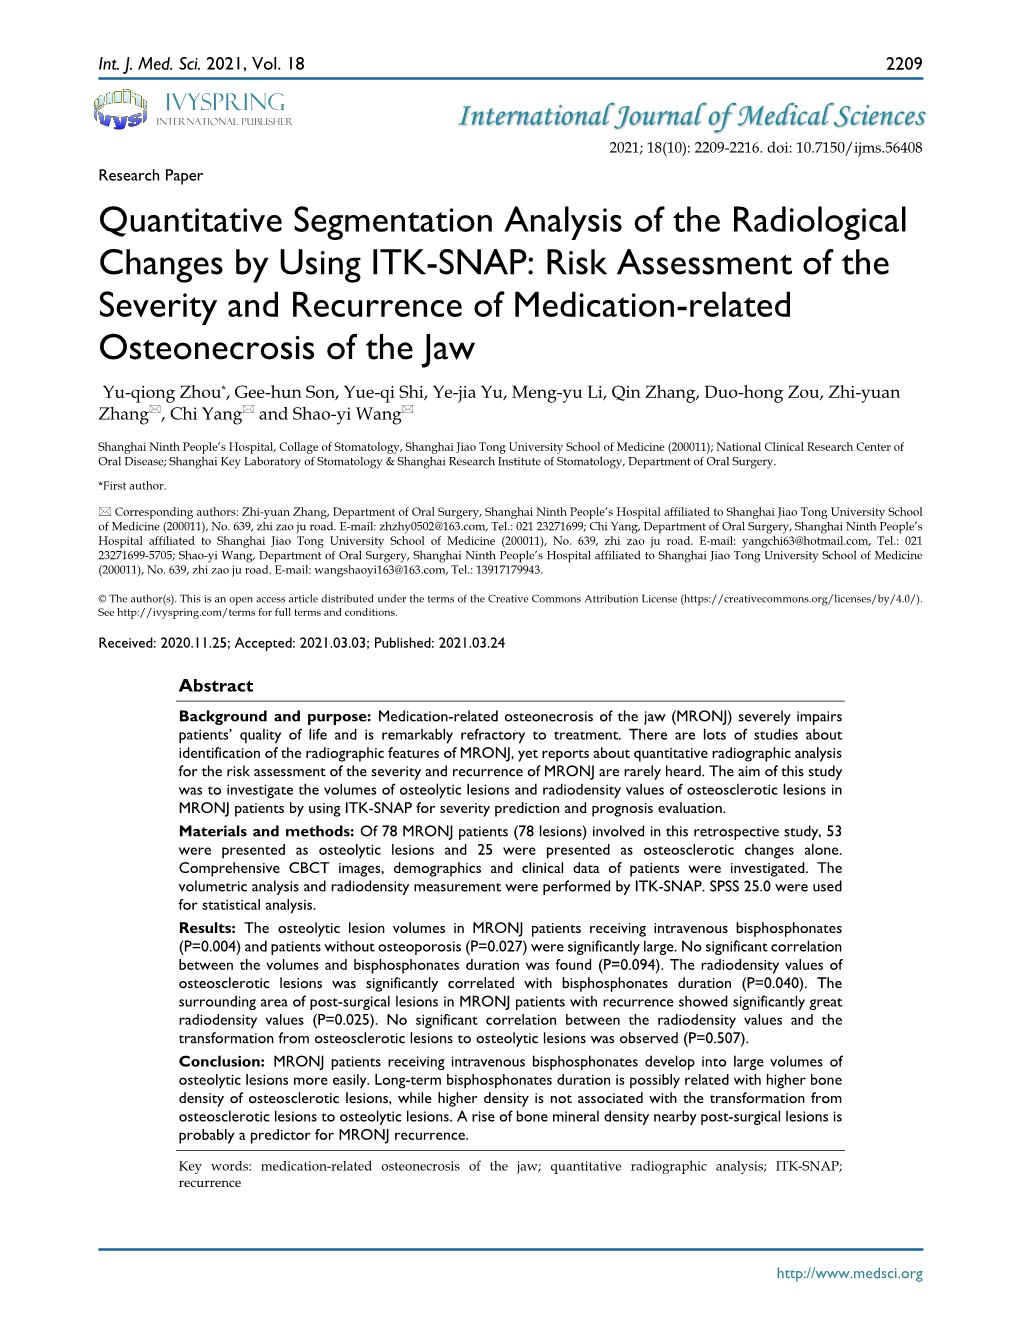 Quantitative Segmentation Analysis of the Radiological Changes by Using